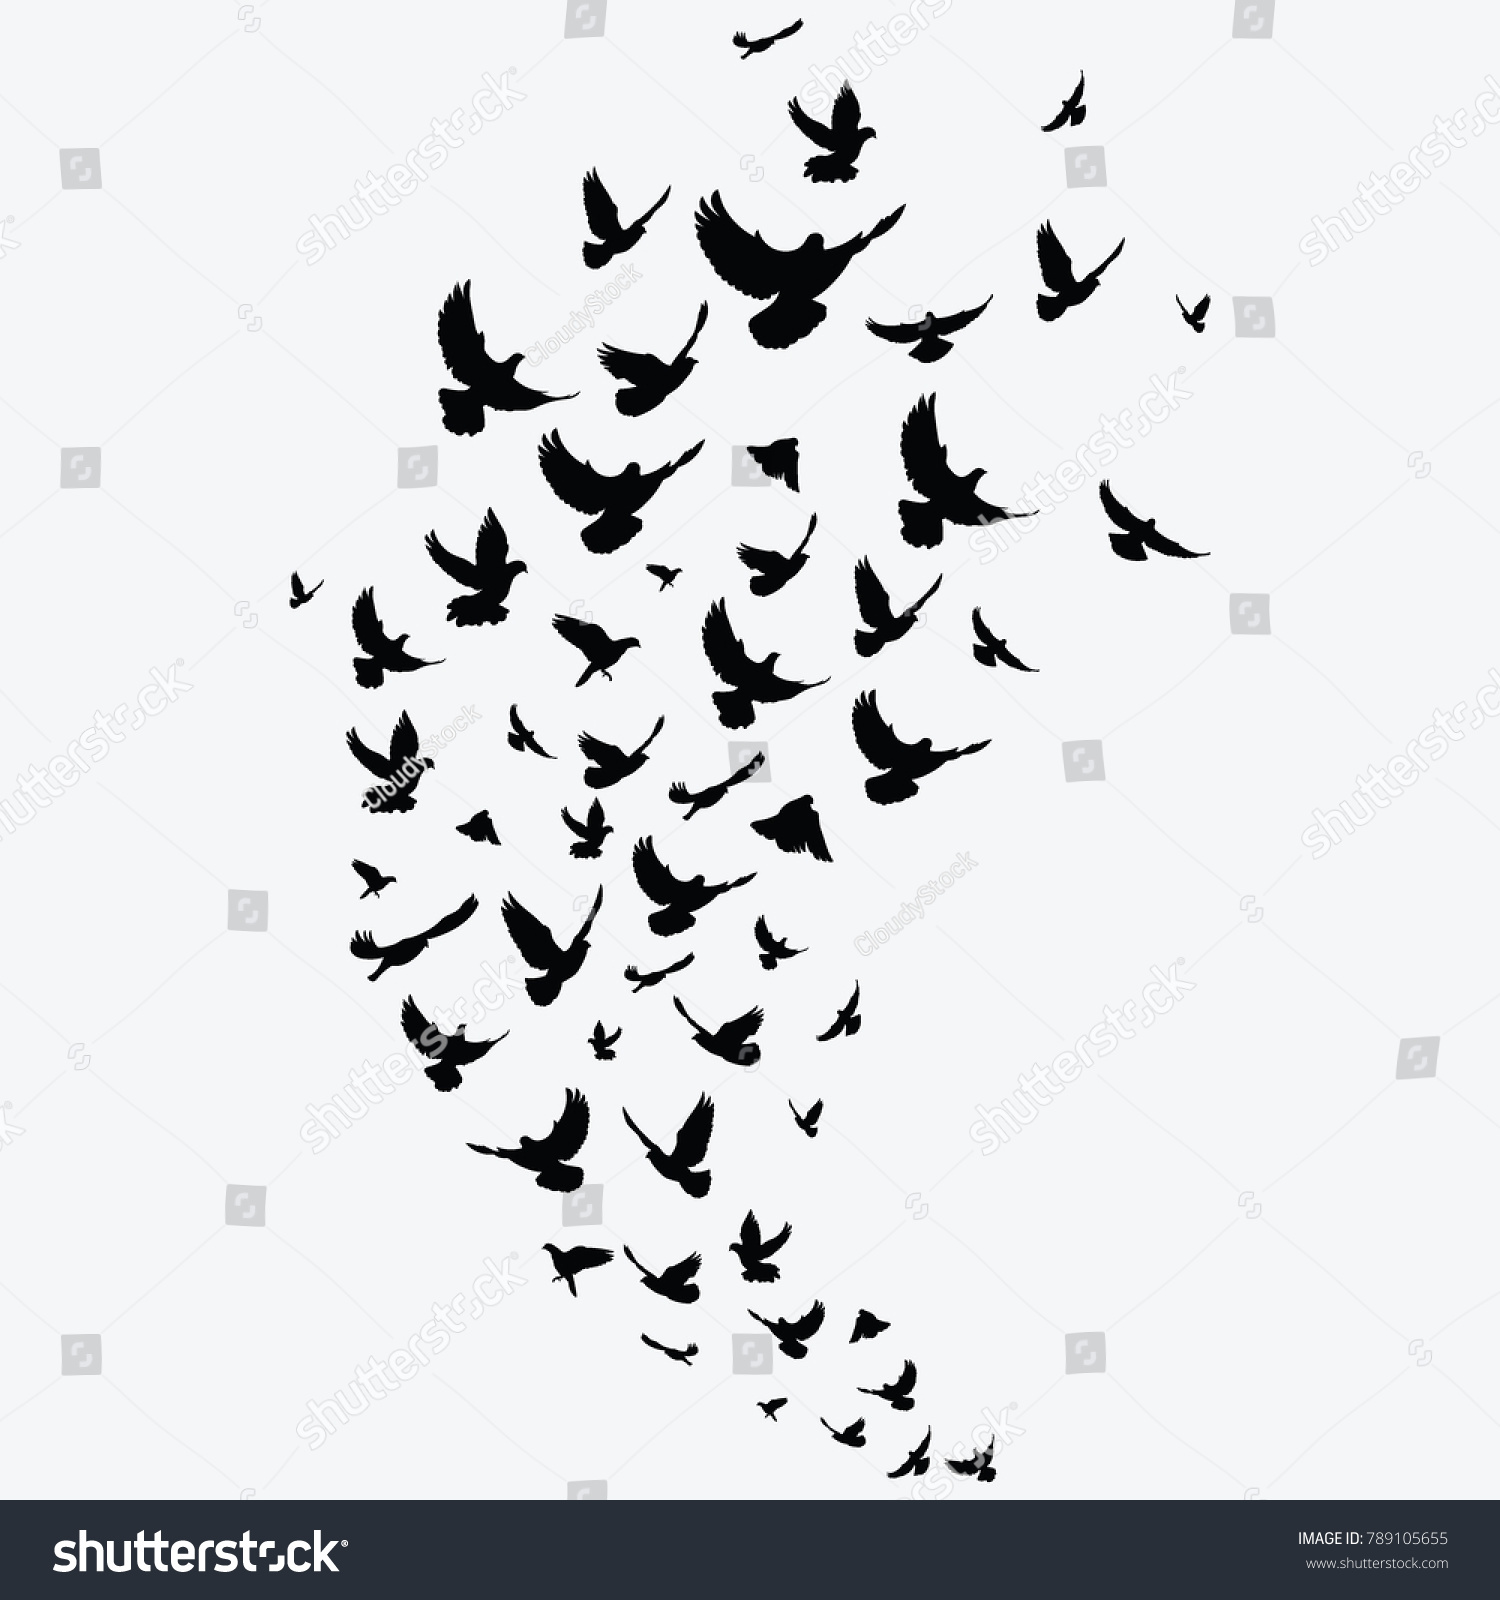 30,687 Flying dove silhouette Images, Stock Photos & Vectors | Shutterstock